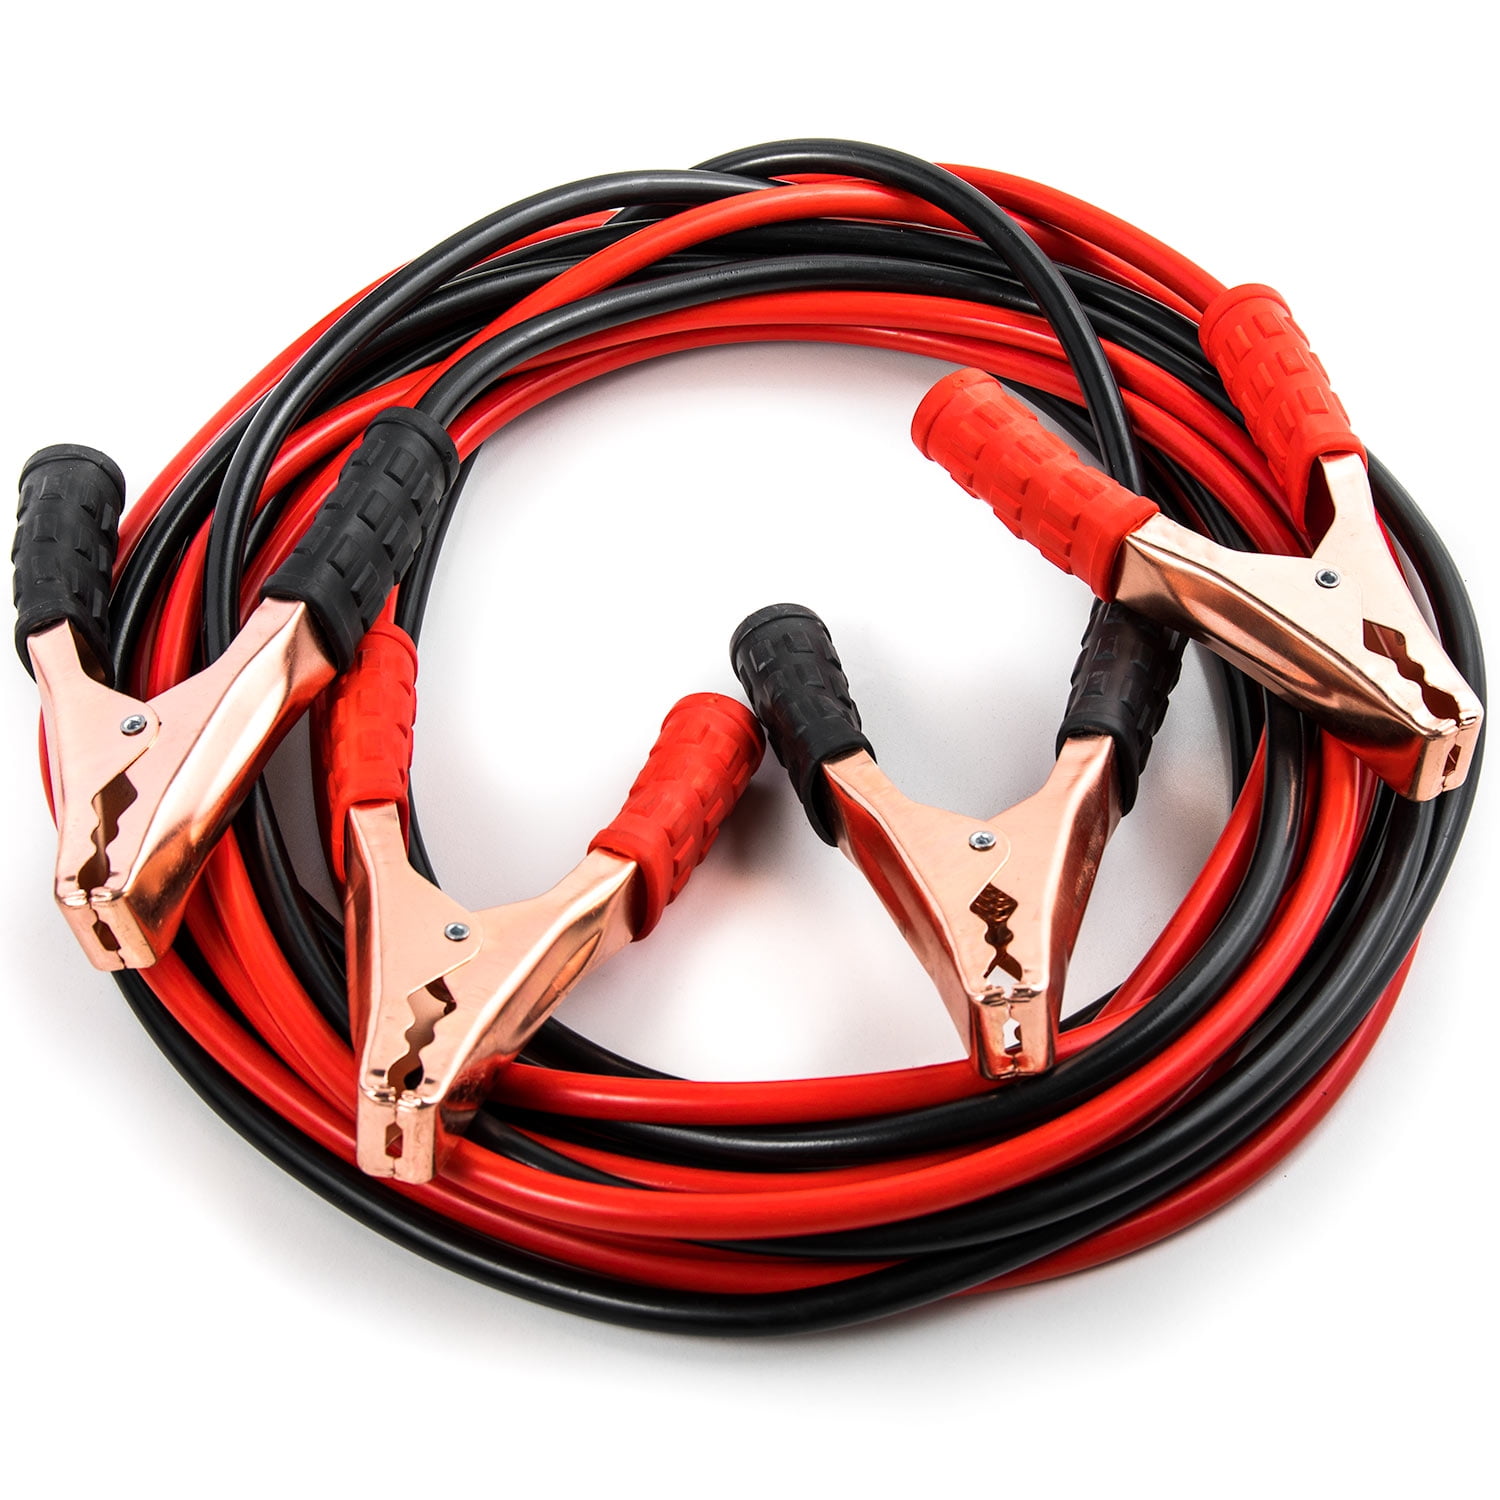 4AWG x 20Ft TOPDC Jumper Cables 4 Gauge 20 Feet Heavy Duty Booster Cables with Carry Bag 